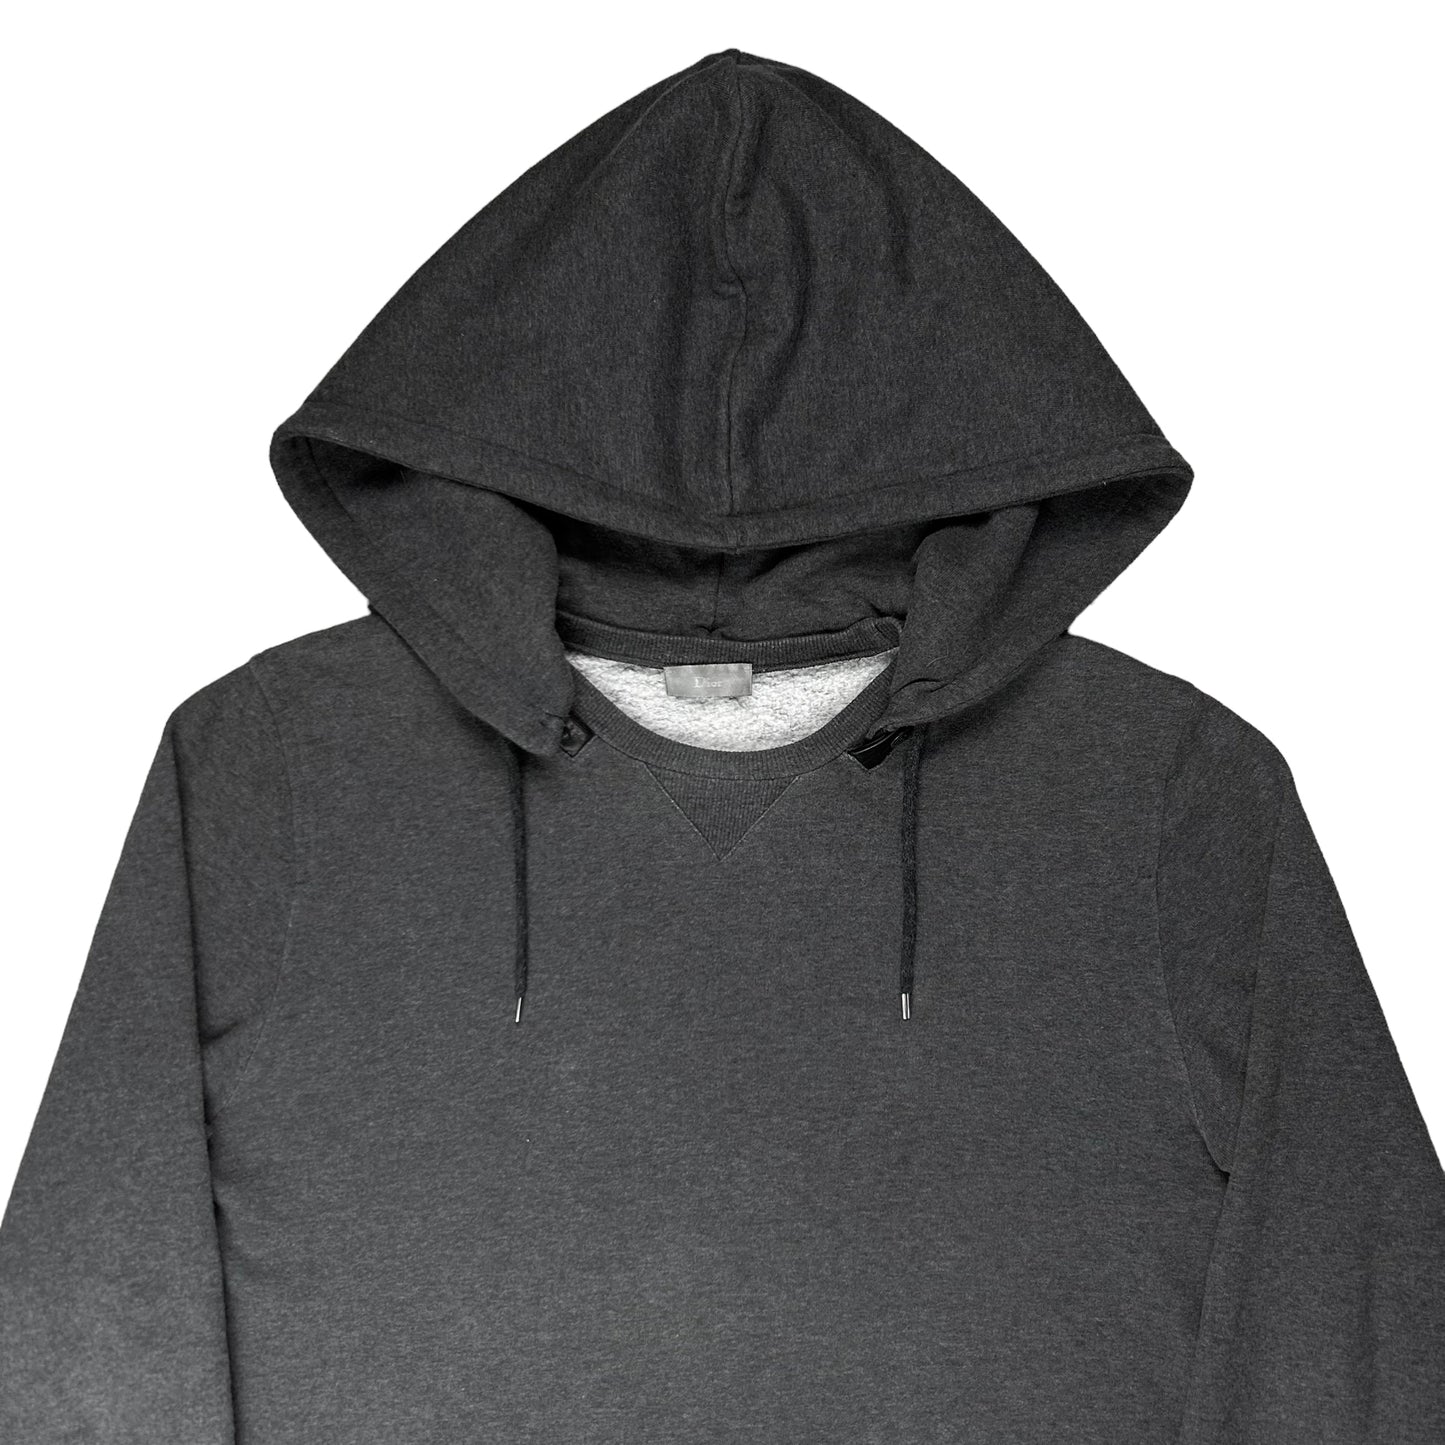 Dior Homme Detachable Leather Trimmed Hoodie